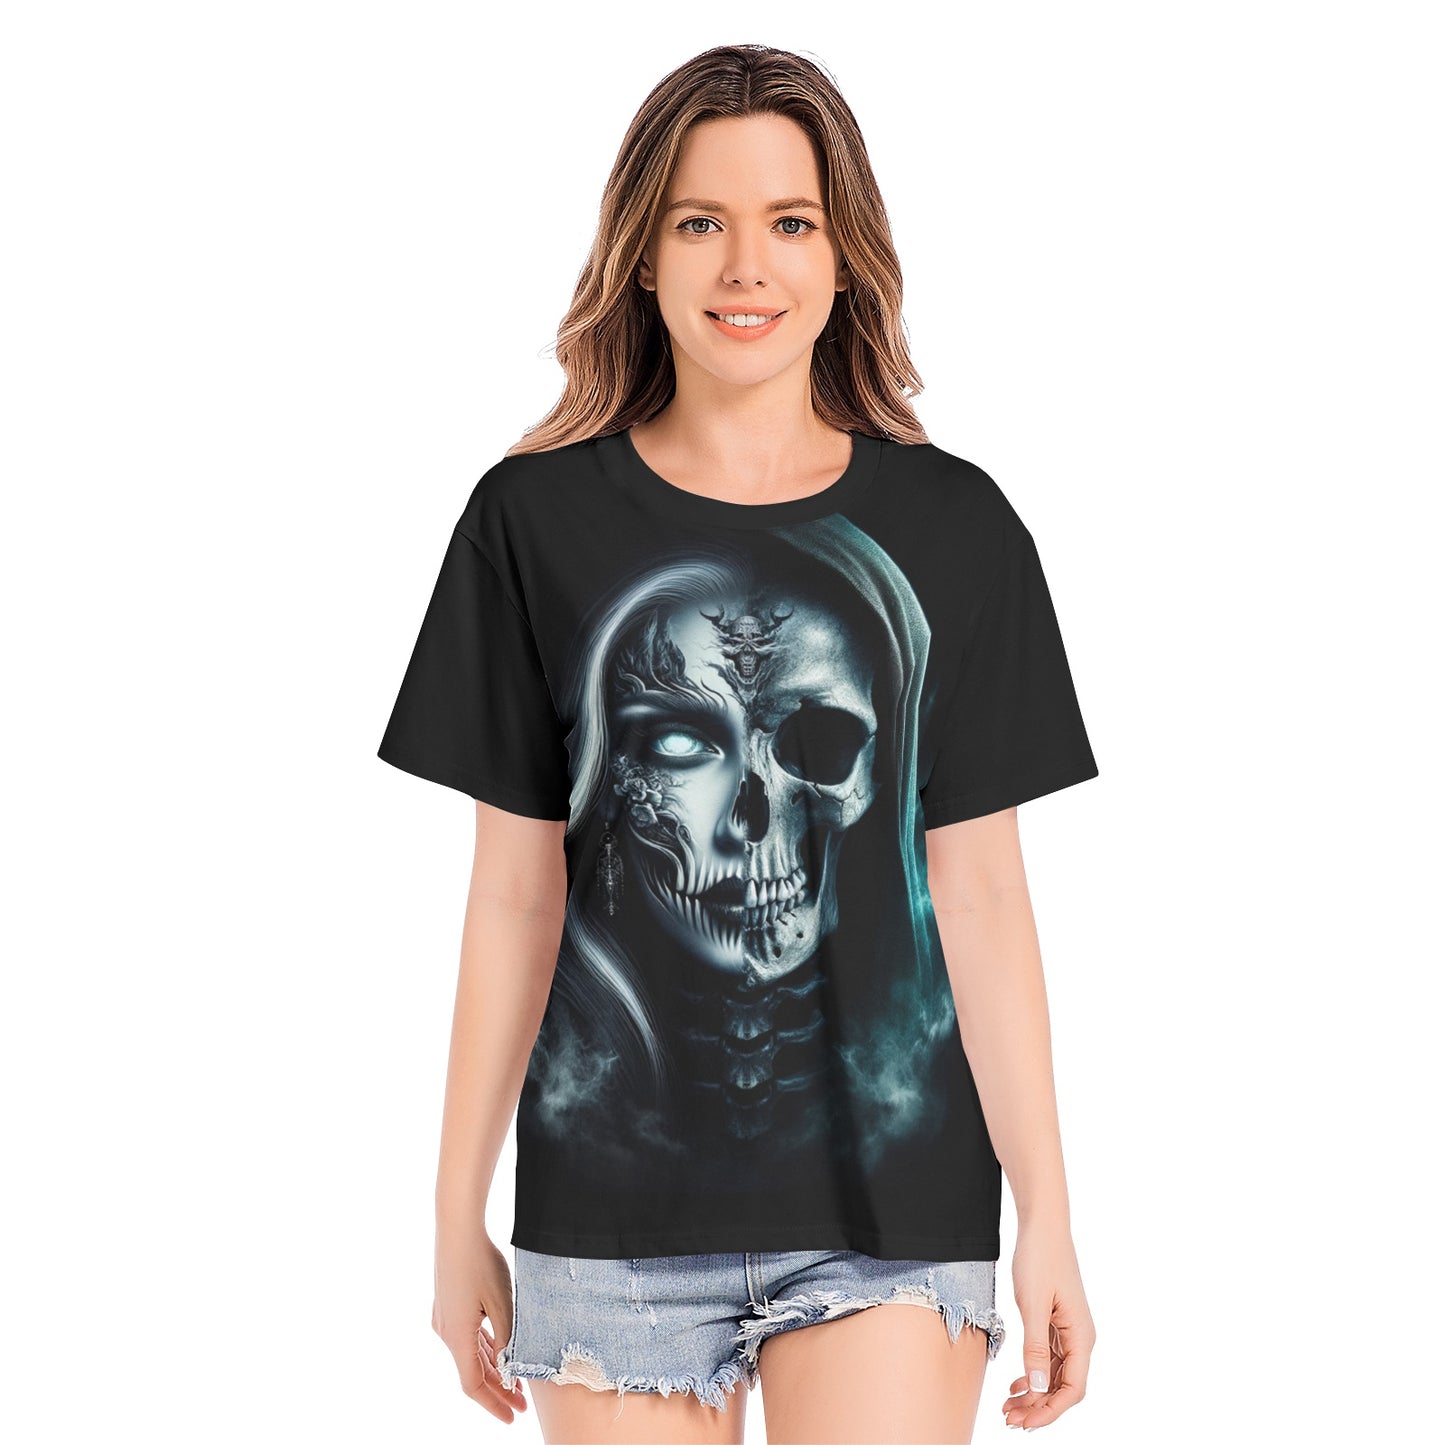 Dark Lore Facade T-Shirt - Unisex Cotton Tee with Two-Faced Print